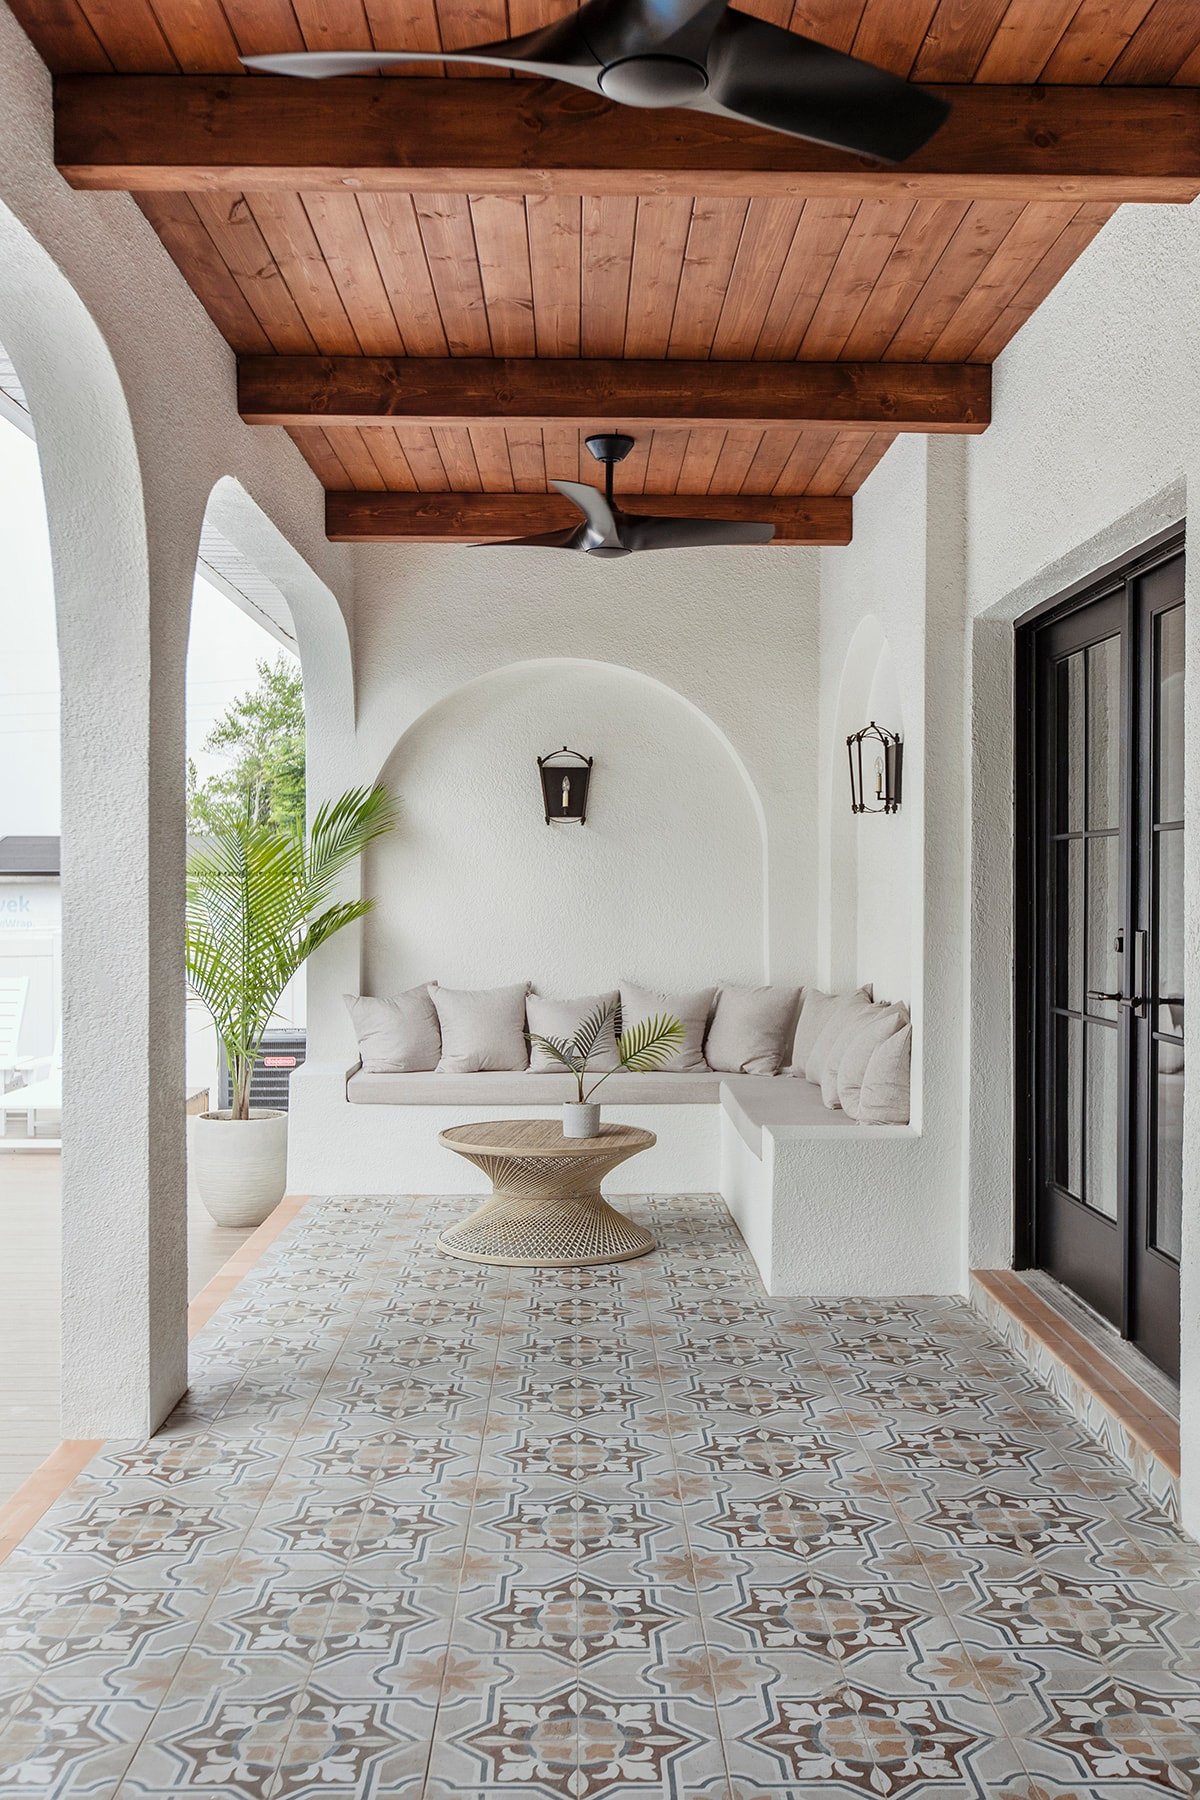 spanish style porch with wood beam ceiling, patterned tile and black french doors, and arches